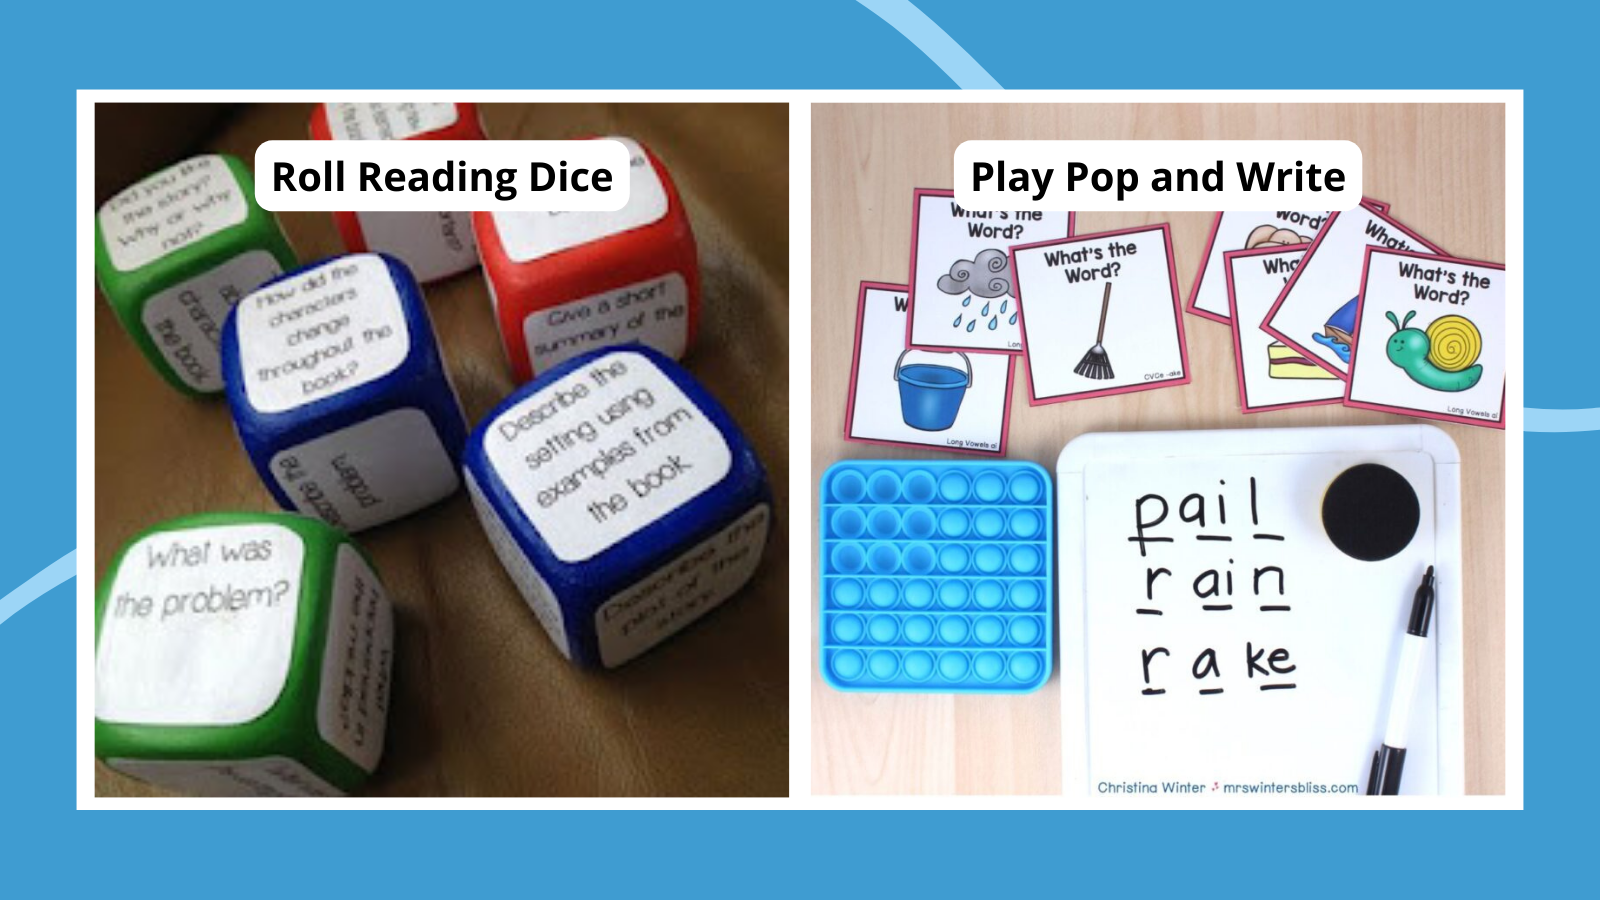 Examples of guided reading activity ideas such as rolling reading dice and playing Pop and Write..